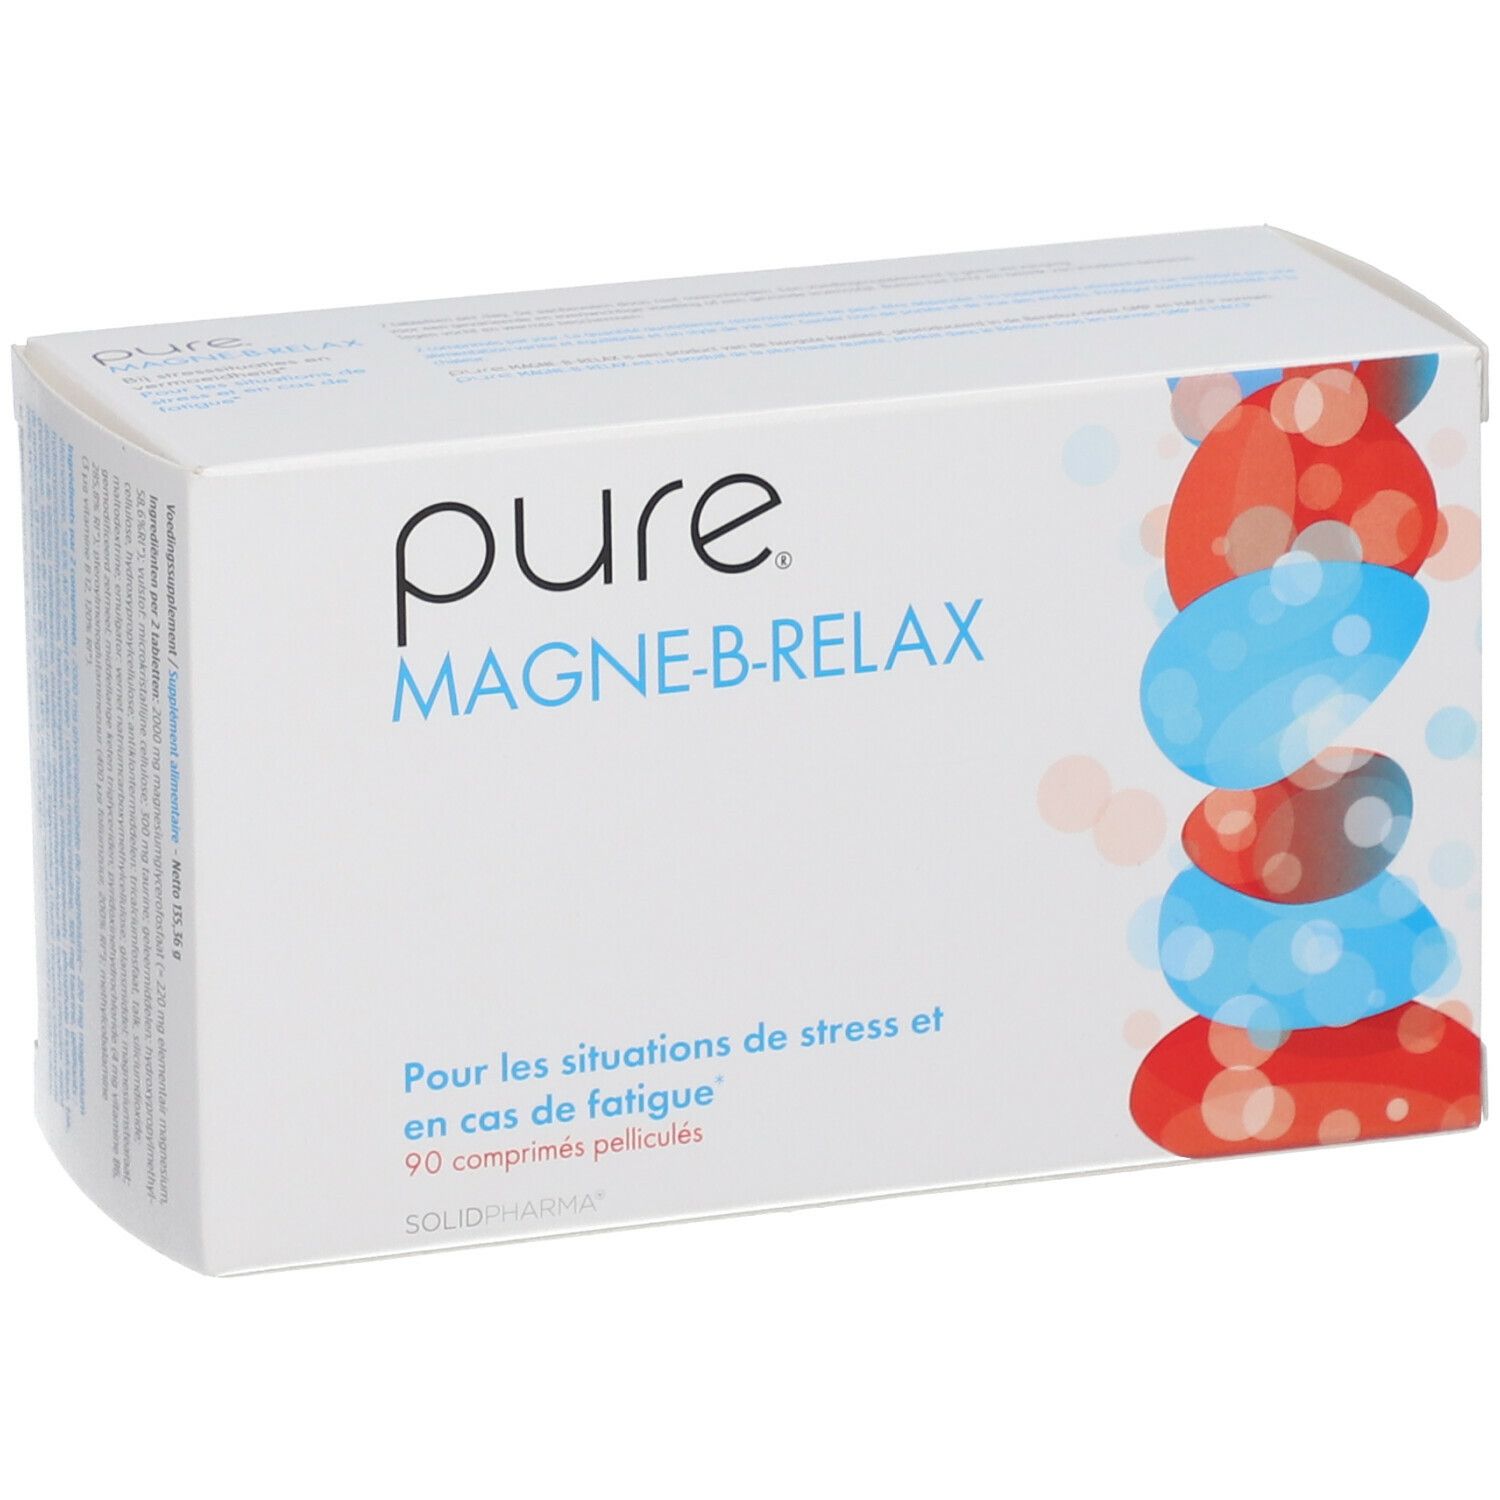 Pure® Magne-B-Relax